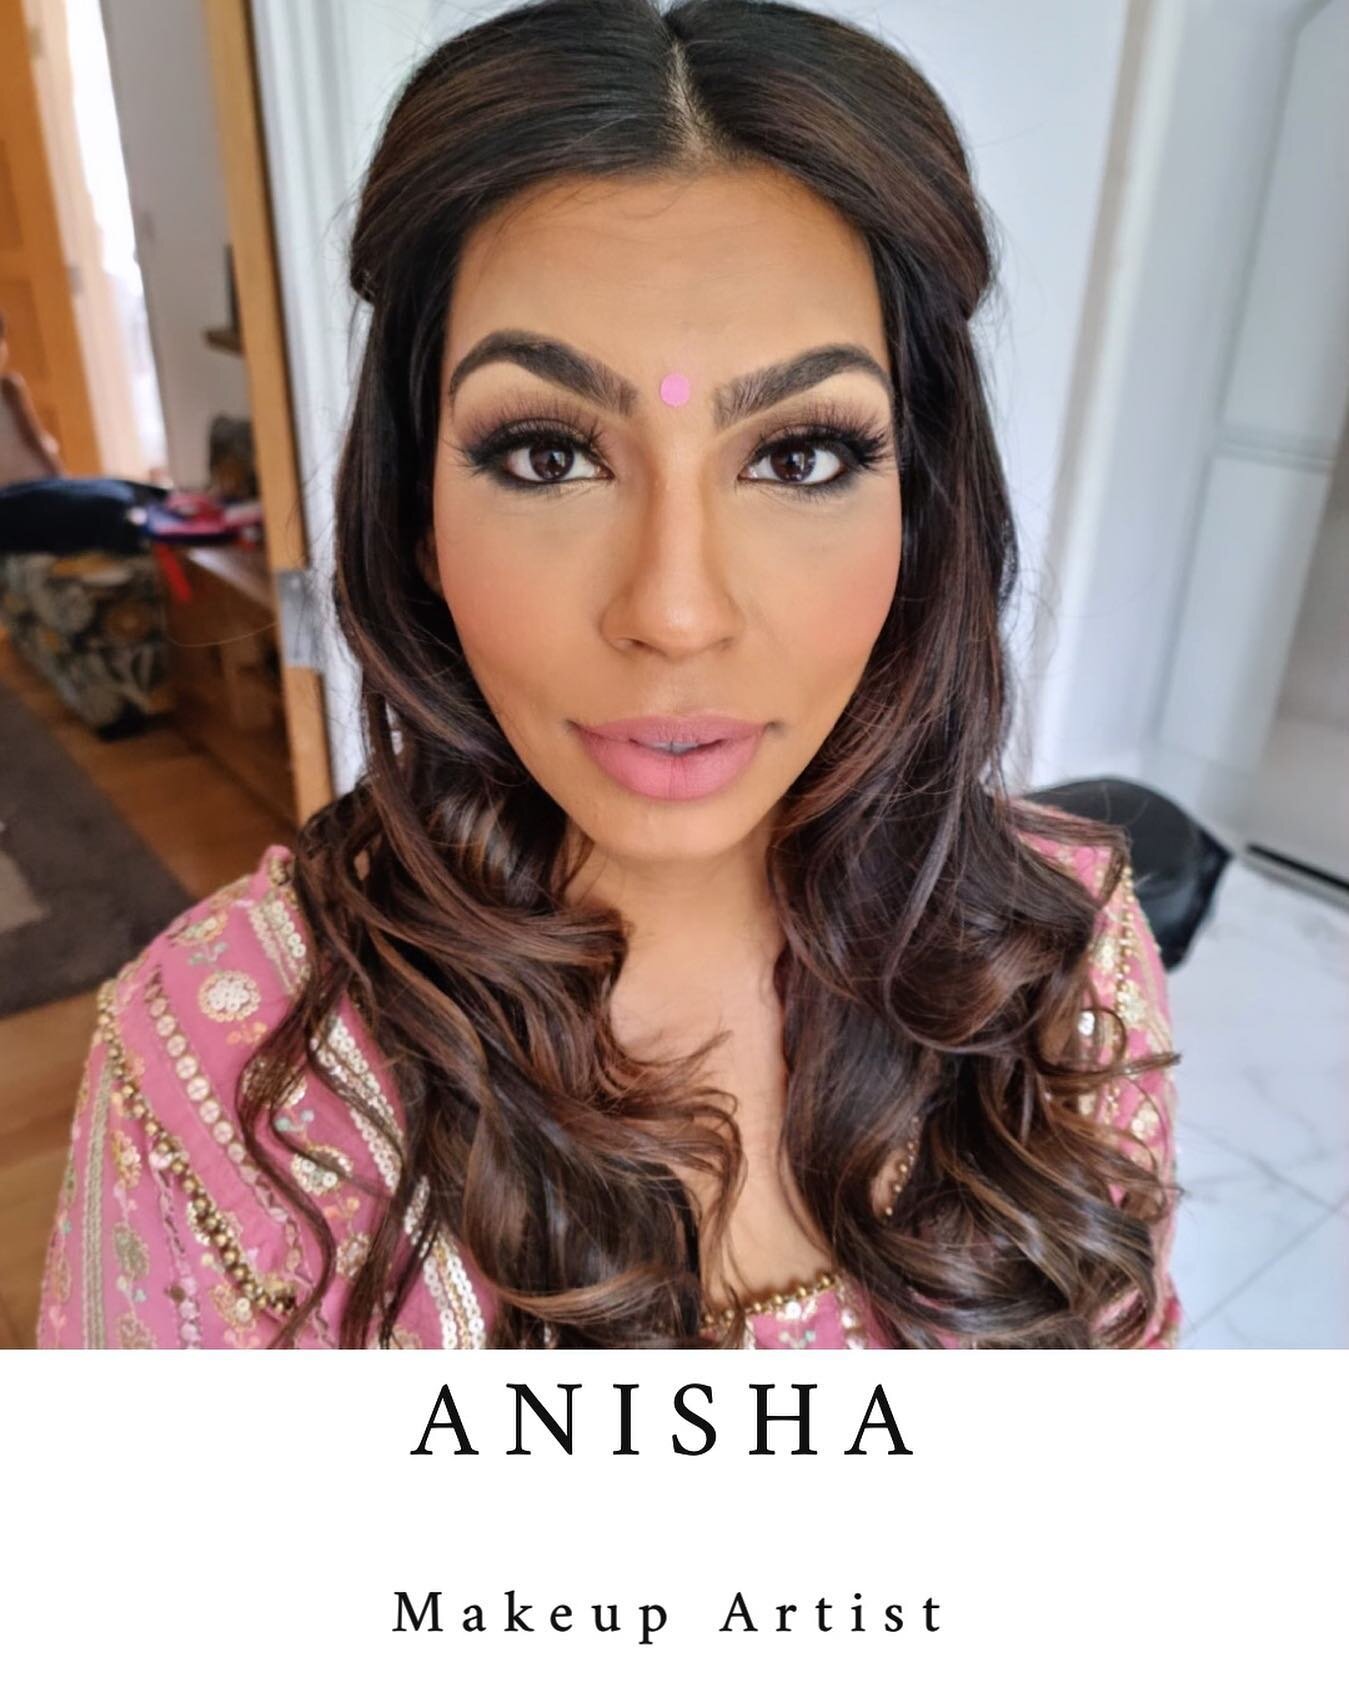 💄MUA: ANISHA
📍Location: LEICESTER - available to travel ----------------------------------------------------------------------------------
To BOOK 👉🏽 Email us at promakeuplondonstylists@gmail.com --------------------------------------------------